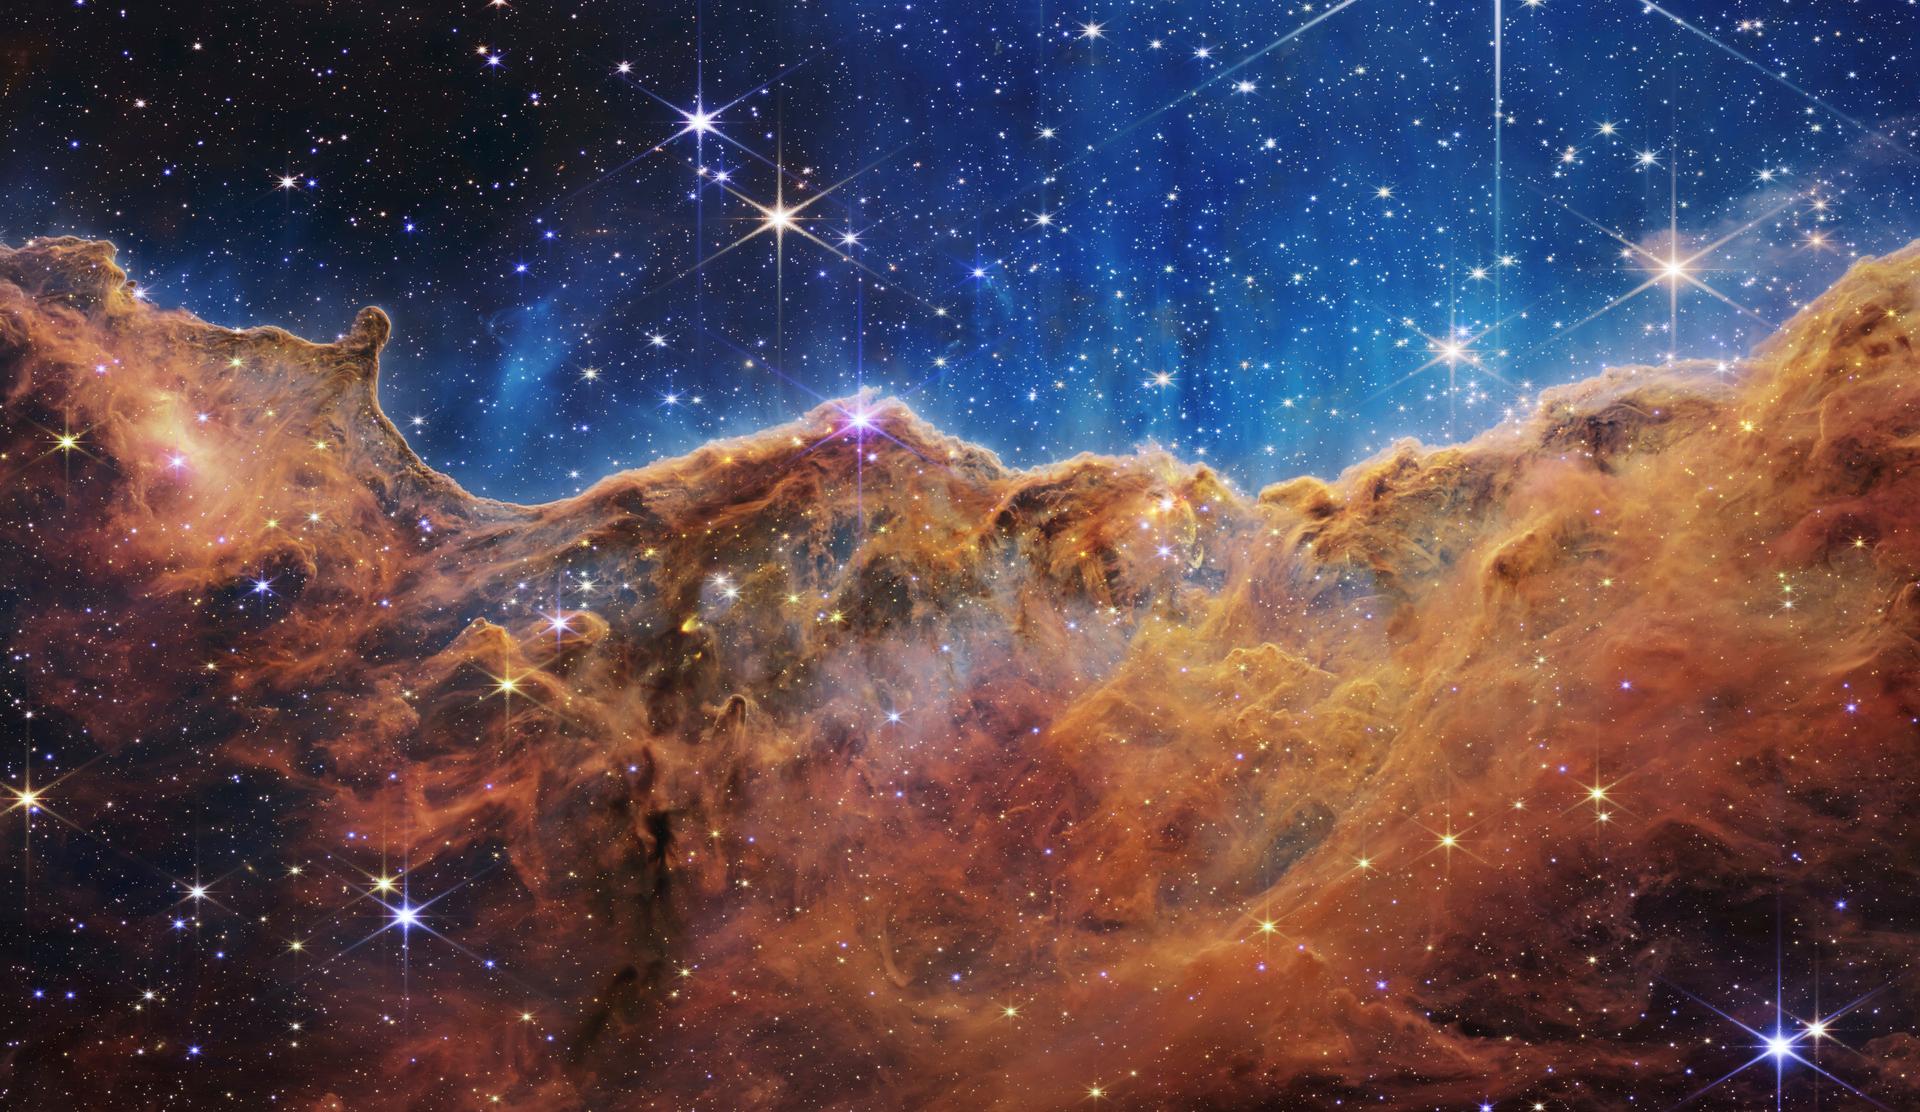 This image shows the edge of a nearby, young, star-forming region NGC 3324 in the Carina Nebula